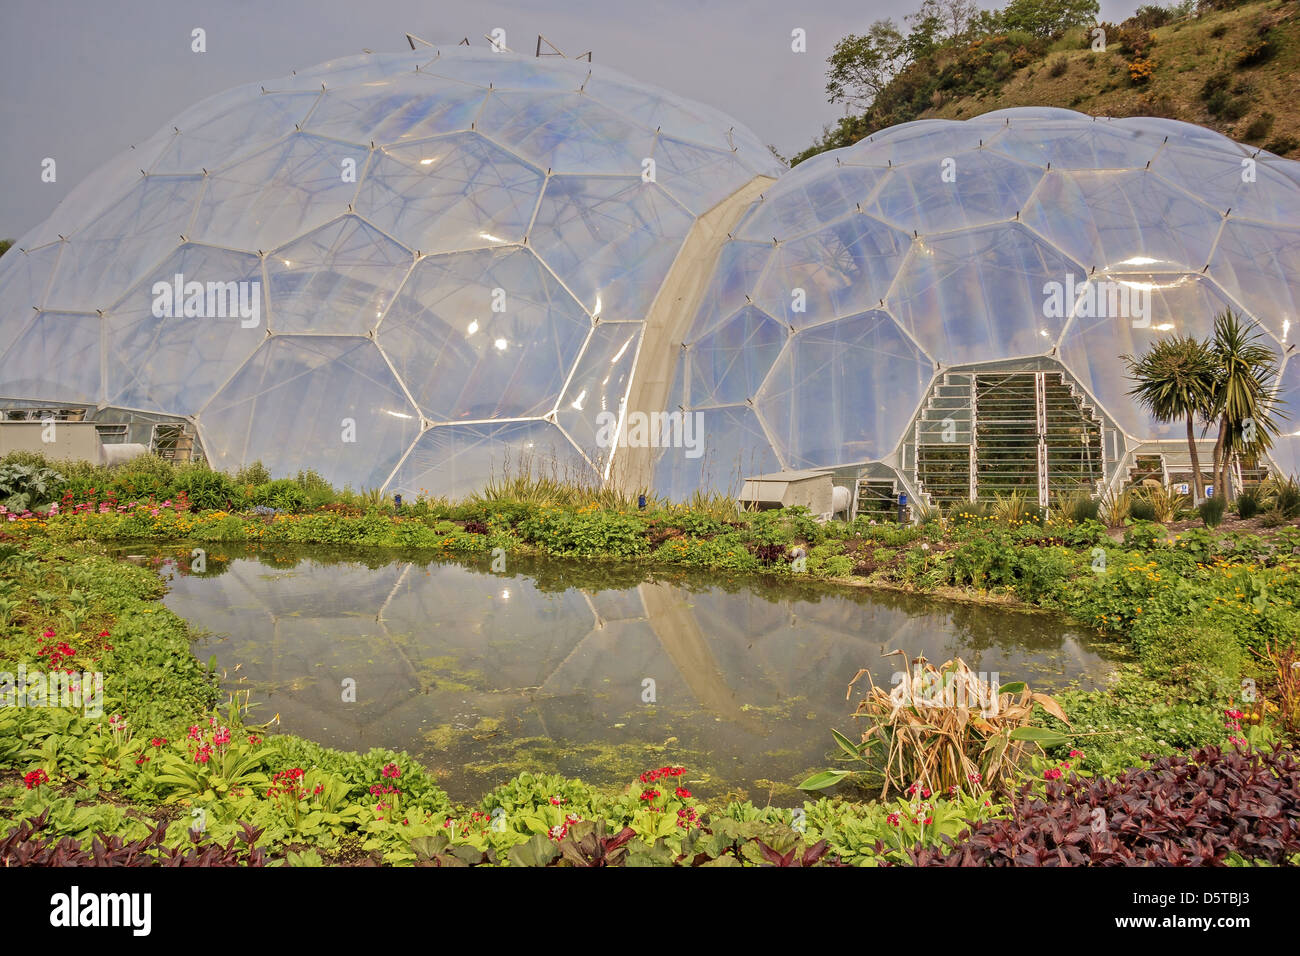 Geodesic Domes Eden Project Cornwall UK Stock Photo